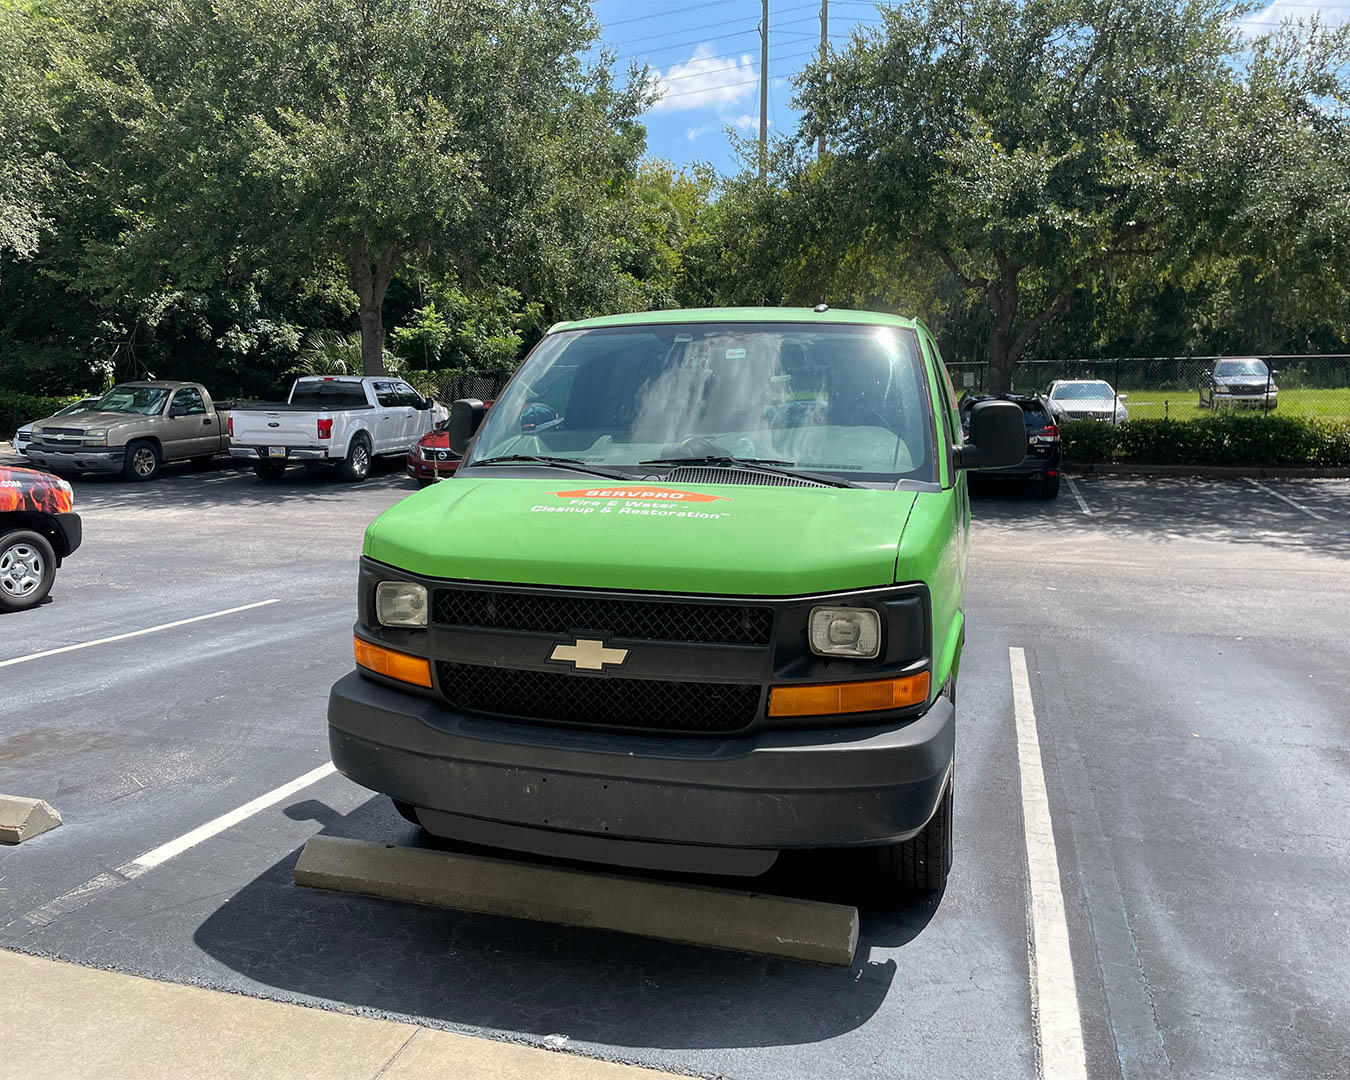 Flooding and water emergencies don't wait for regular business hours and neither do we. SERVPRO of Lake Mary, Heathrow provides emergency cleaning and restoration services 24 hours a day, 7 days a week-including all holidays. You can expect an immediate response time, day or night.